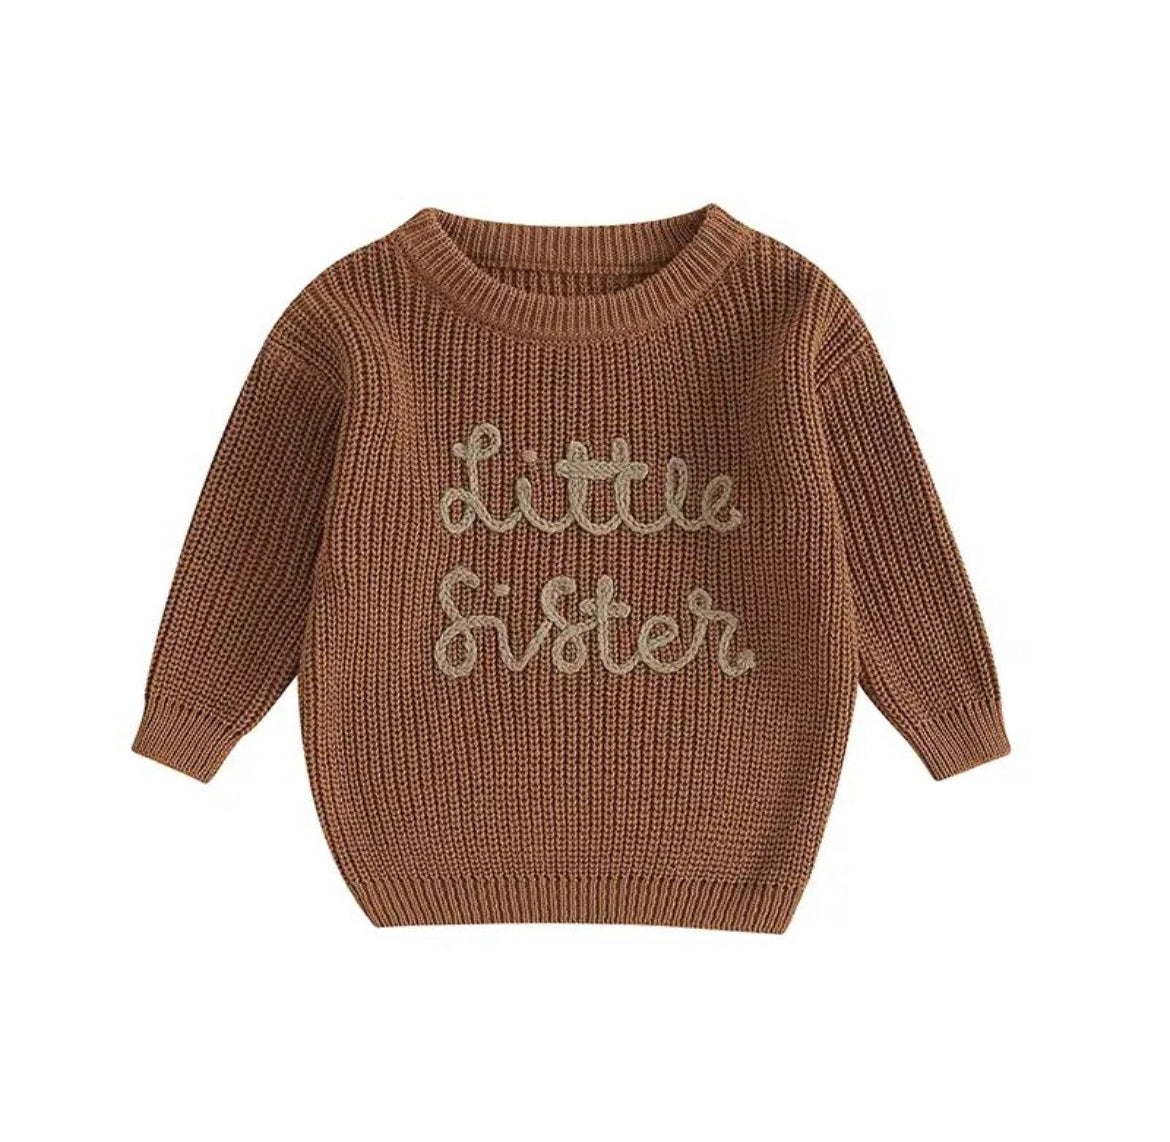 'Little Sister' Embroidered Knit Sweater